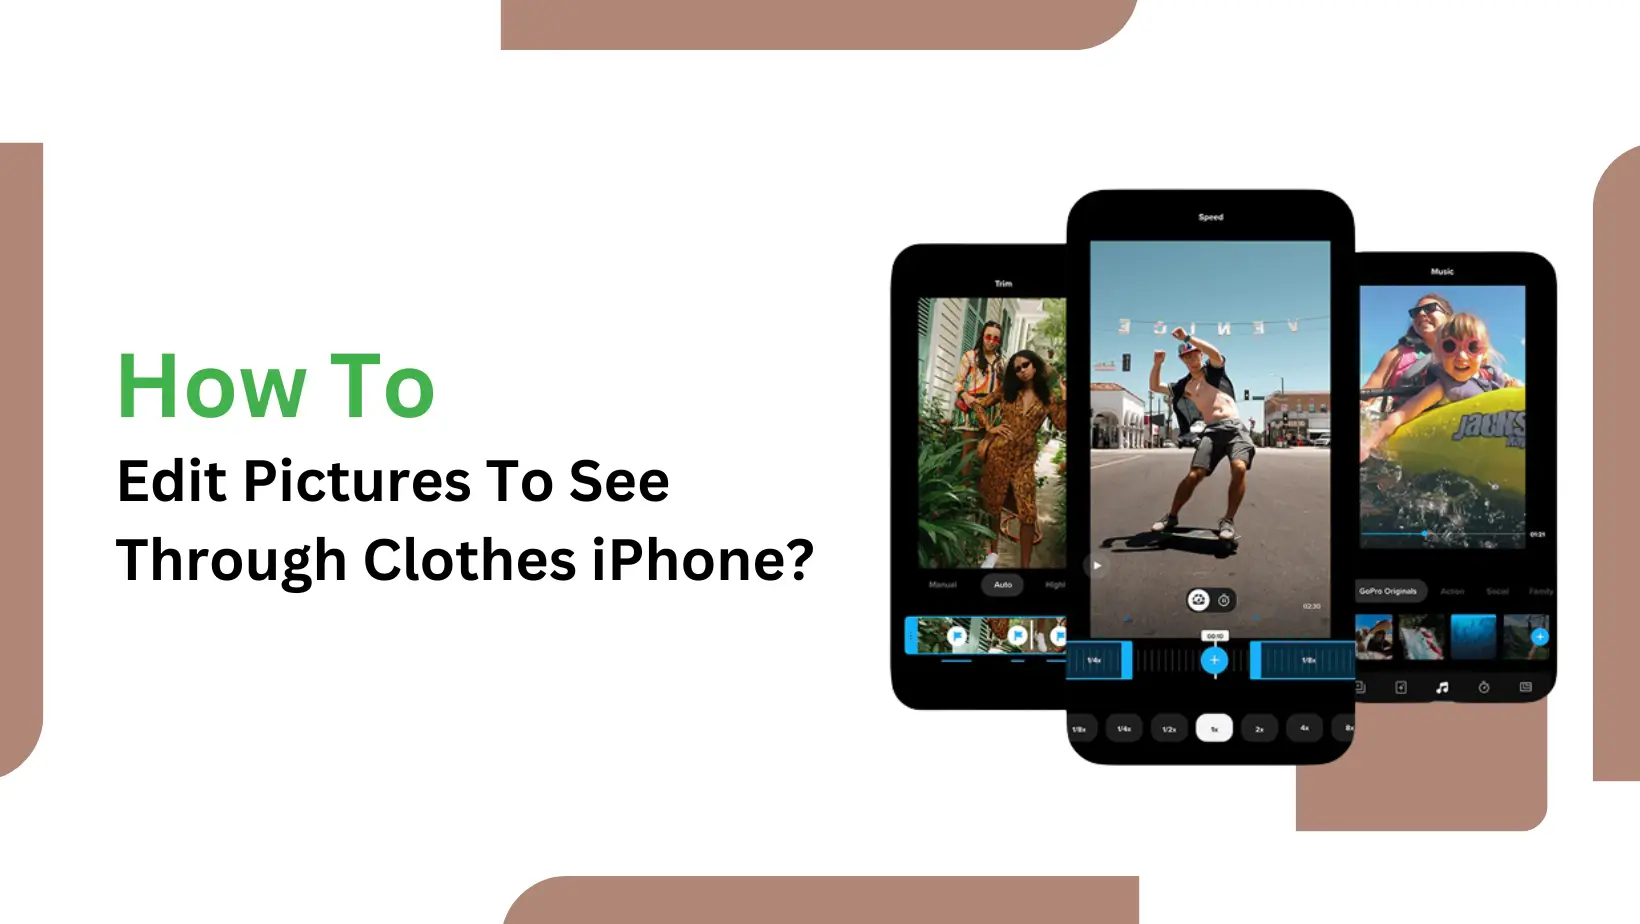 How To Edit Pictures To See Through Clothes iPhone